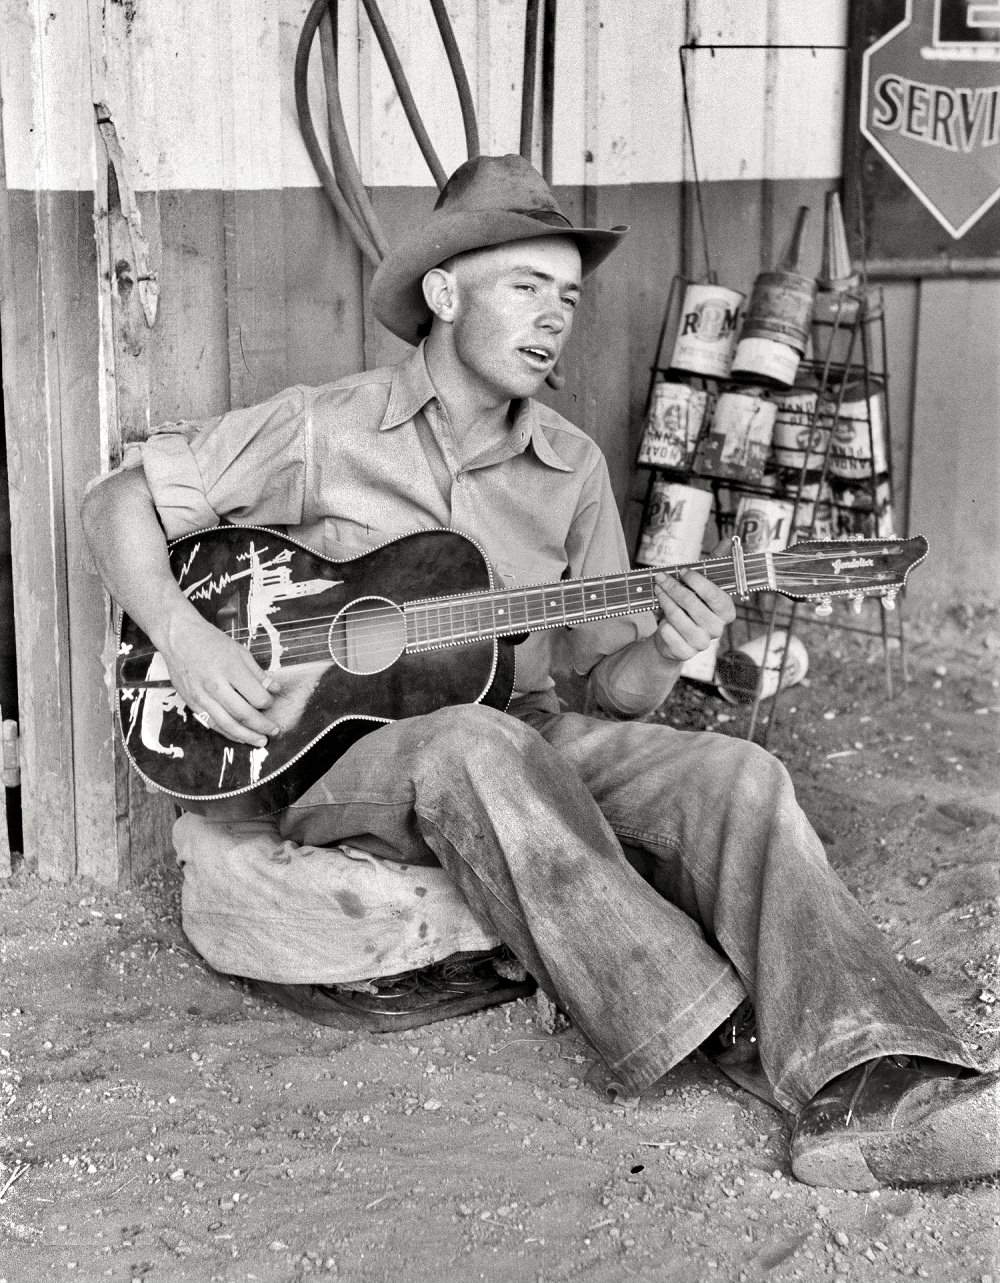 Farm boy playing guitar in front of the filling station and garage, Pie Town, New Mexico, June 1940